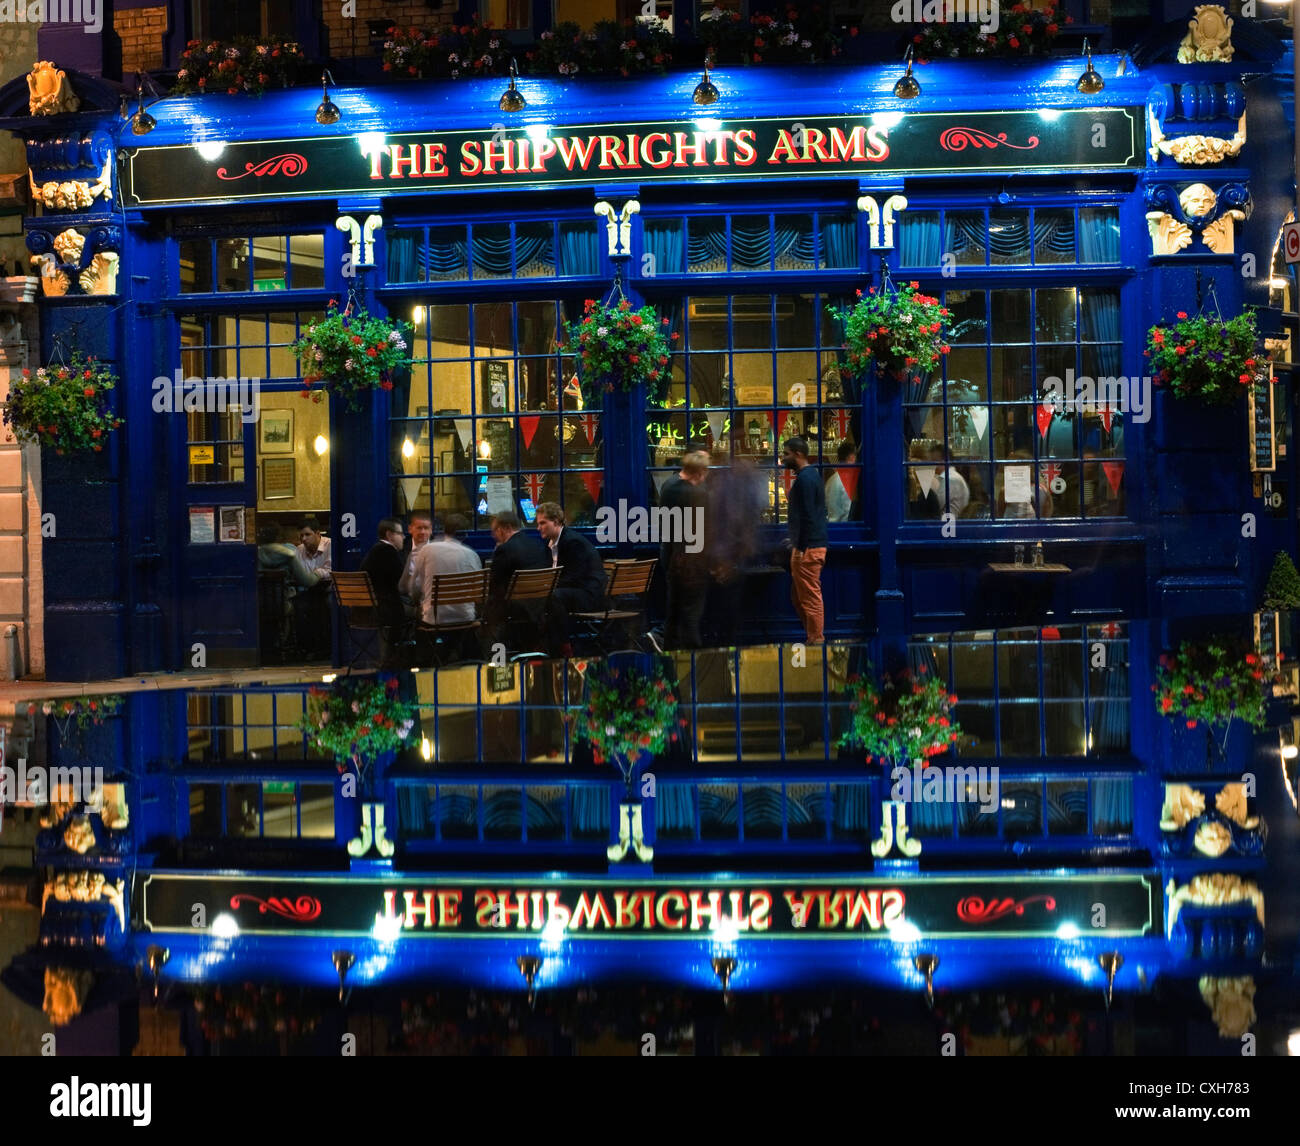 The Shipwright Arms on Tooley Street London reflected in a  water feature with City workers drinking outside at night Stock Photo